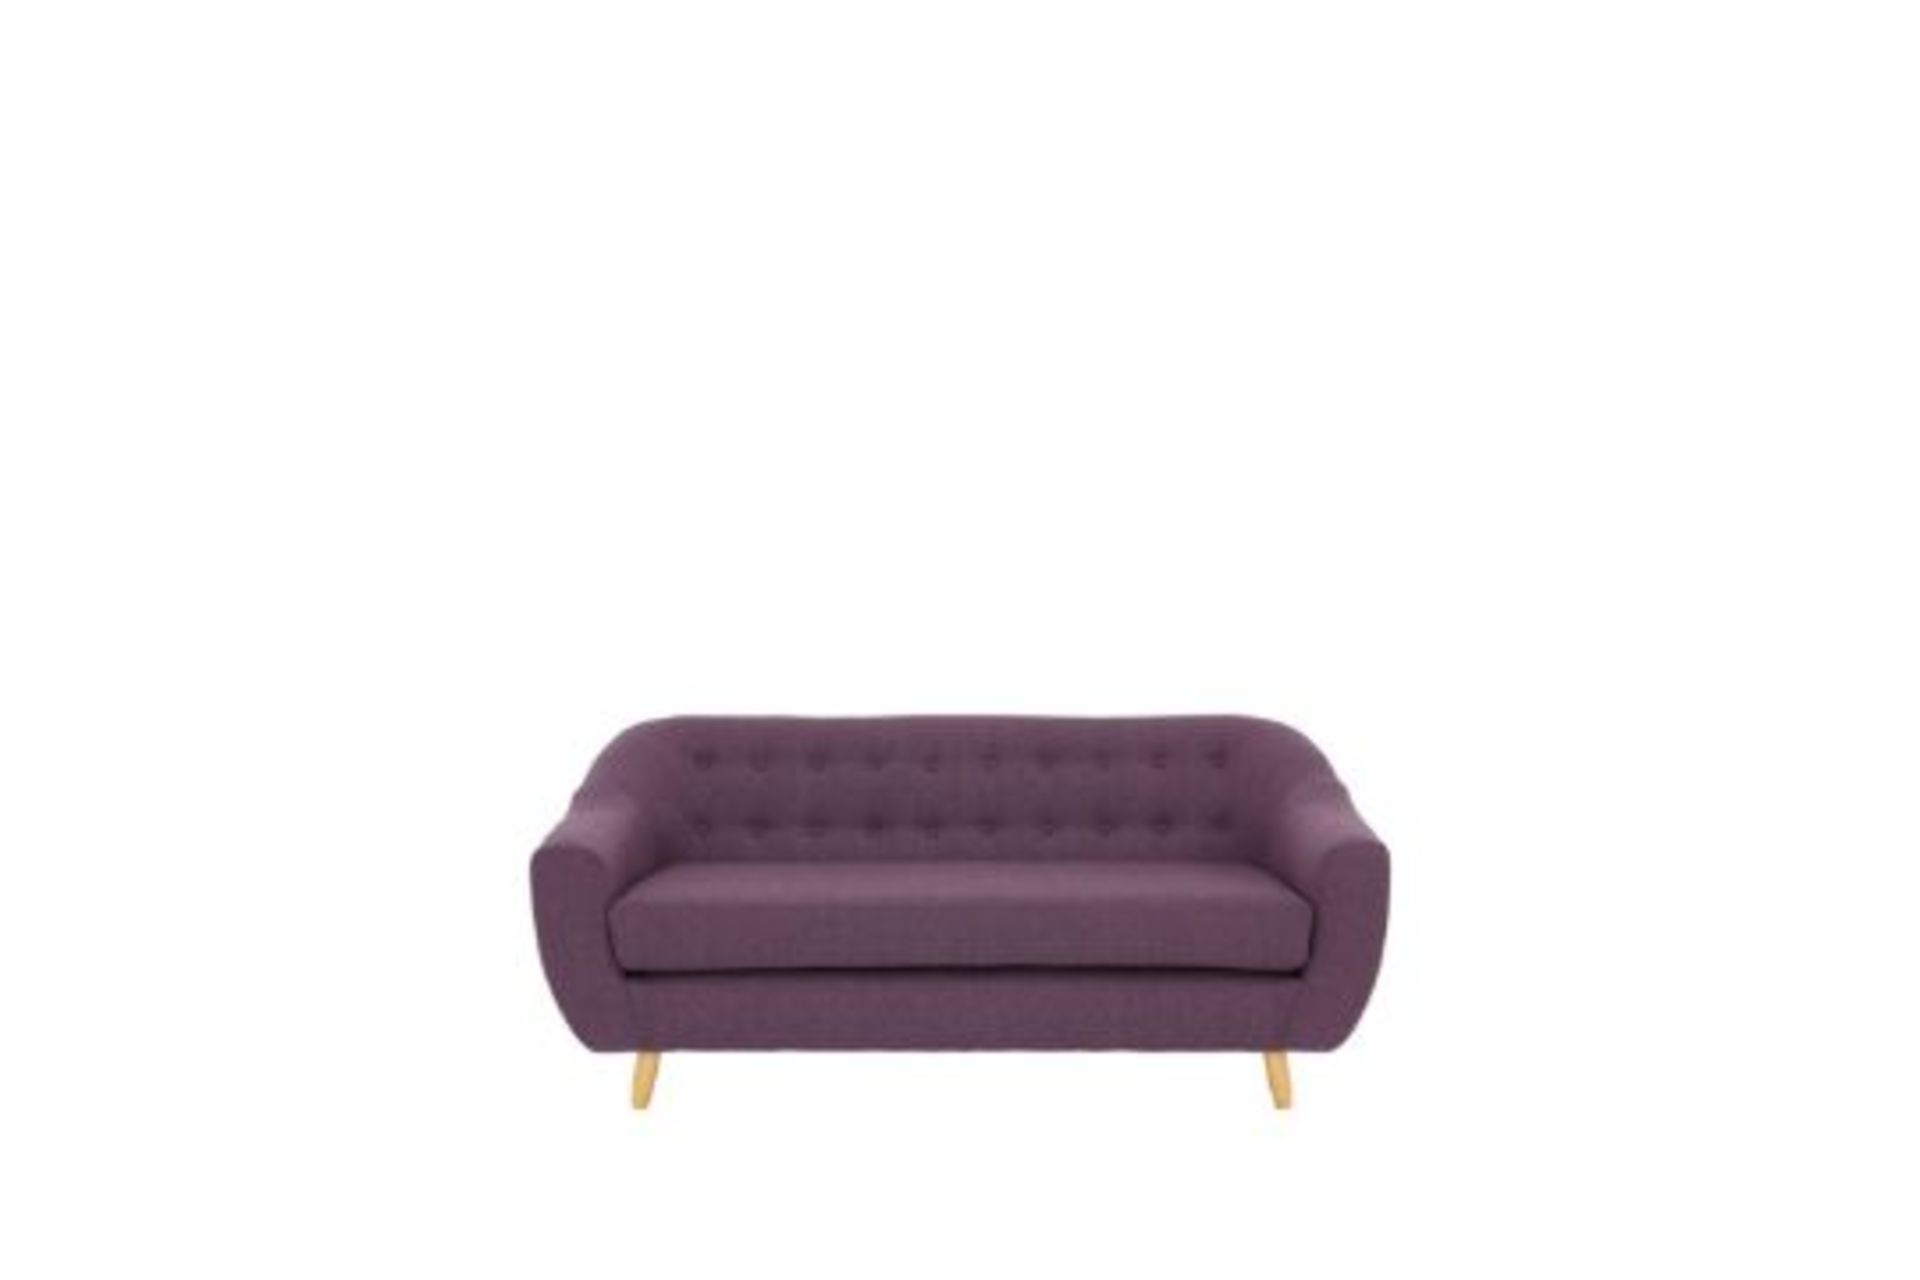 CLAUDIA 3 SEATER SOFA. RPP £479.00. Dimensions: Height 87, Width 188, Depth 82 cm (approx.) - Image 2 of 3